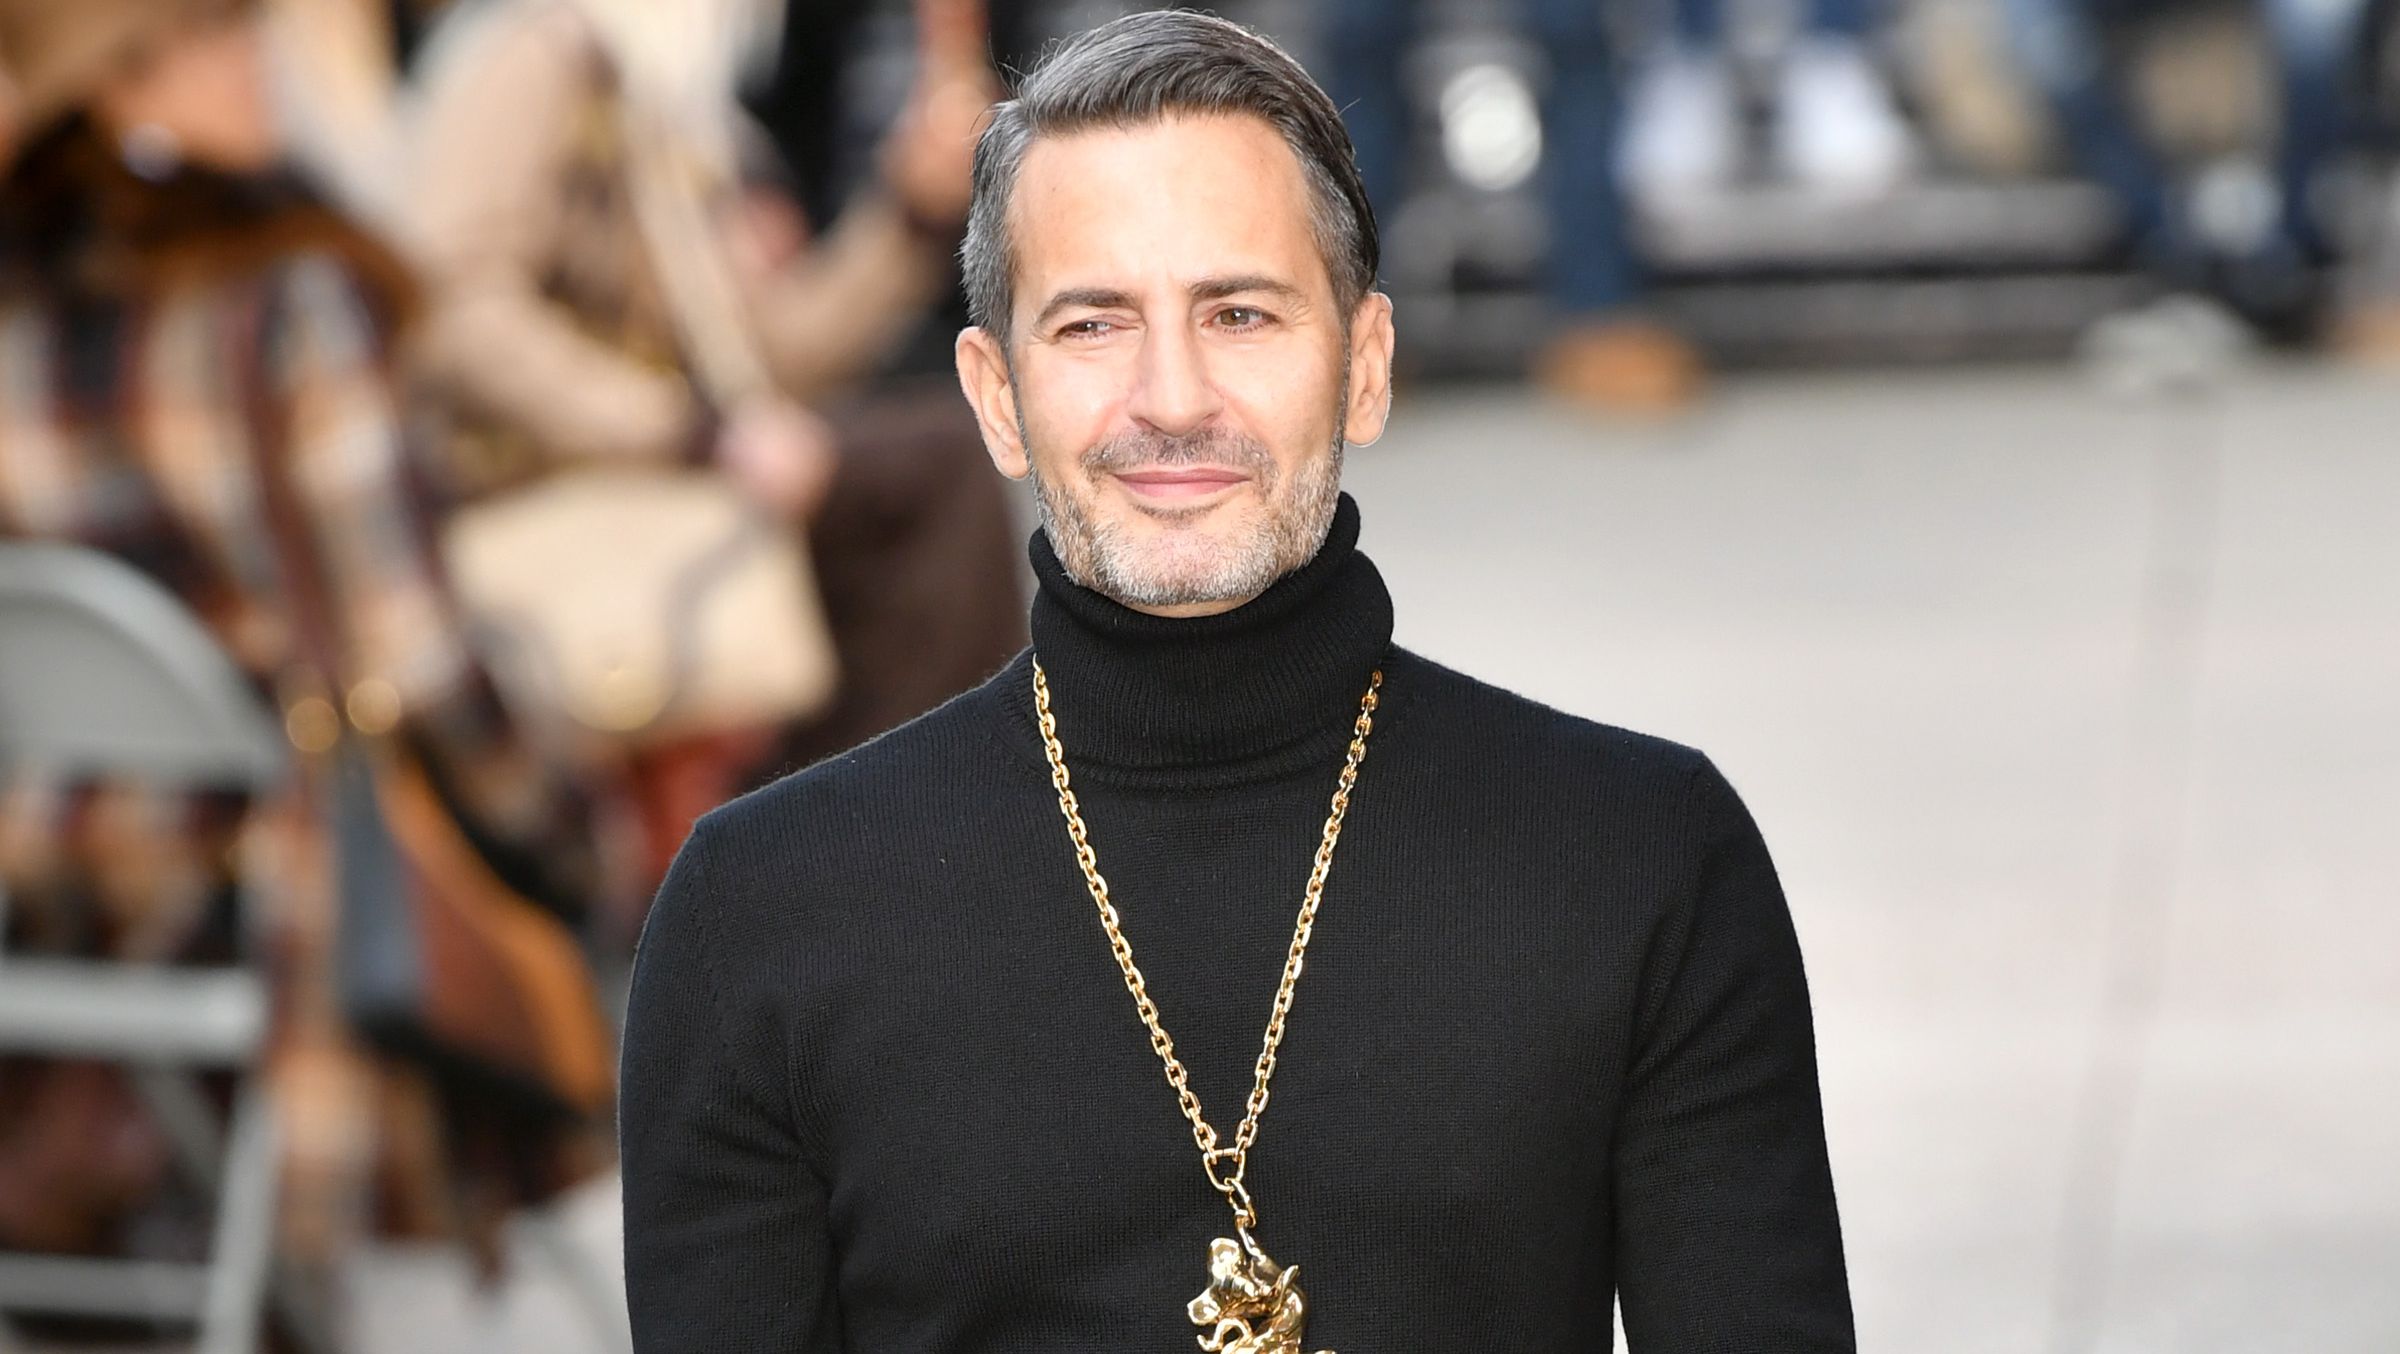 Where's Marc Jacobs?